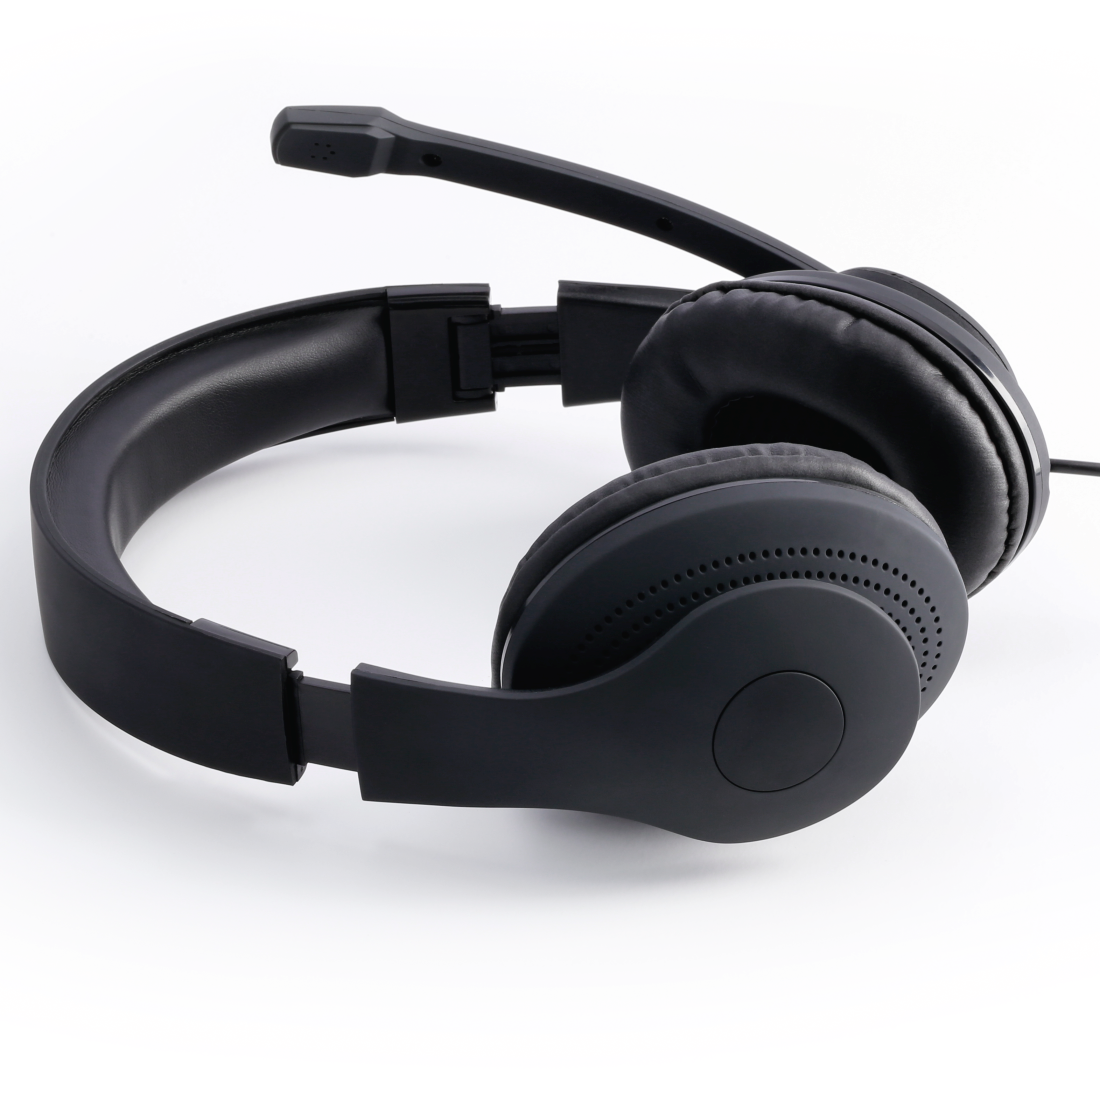 Hama HS-USB300 Over-Ear PC Office Stereo Headset - Black | 419682 from Hama - DID Electrical